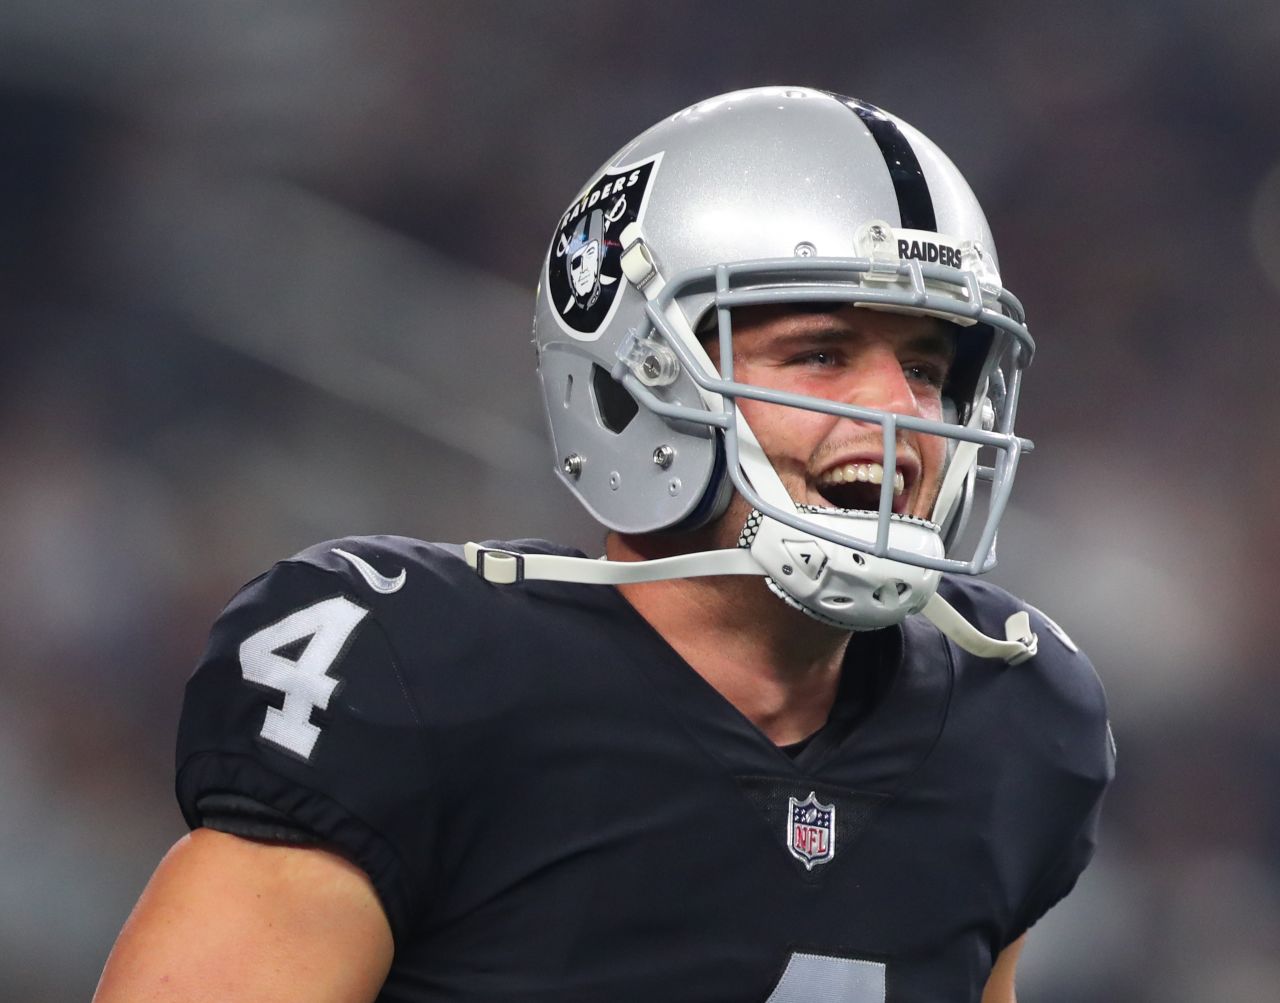 The Oakland Raiders made Derek Carr their franchise QB in 2017 with a five-year, $125 million deal -- briefly crowning the former Fresno State man as the highest paid player in the league. Carr has been a Pro-Bowler three of his first four seasons in Oakland, and should be a mainstay with the team well into its planned move to Las Vegas set for 2020. 